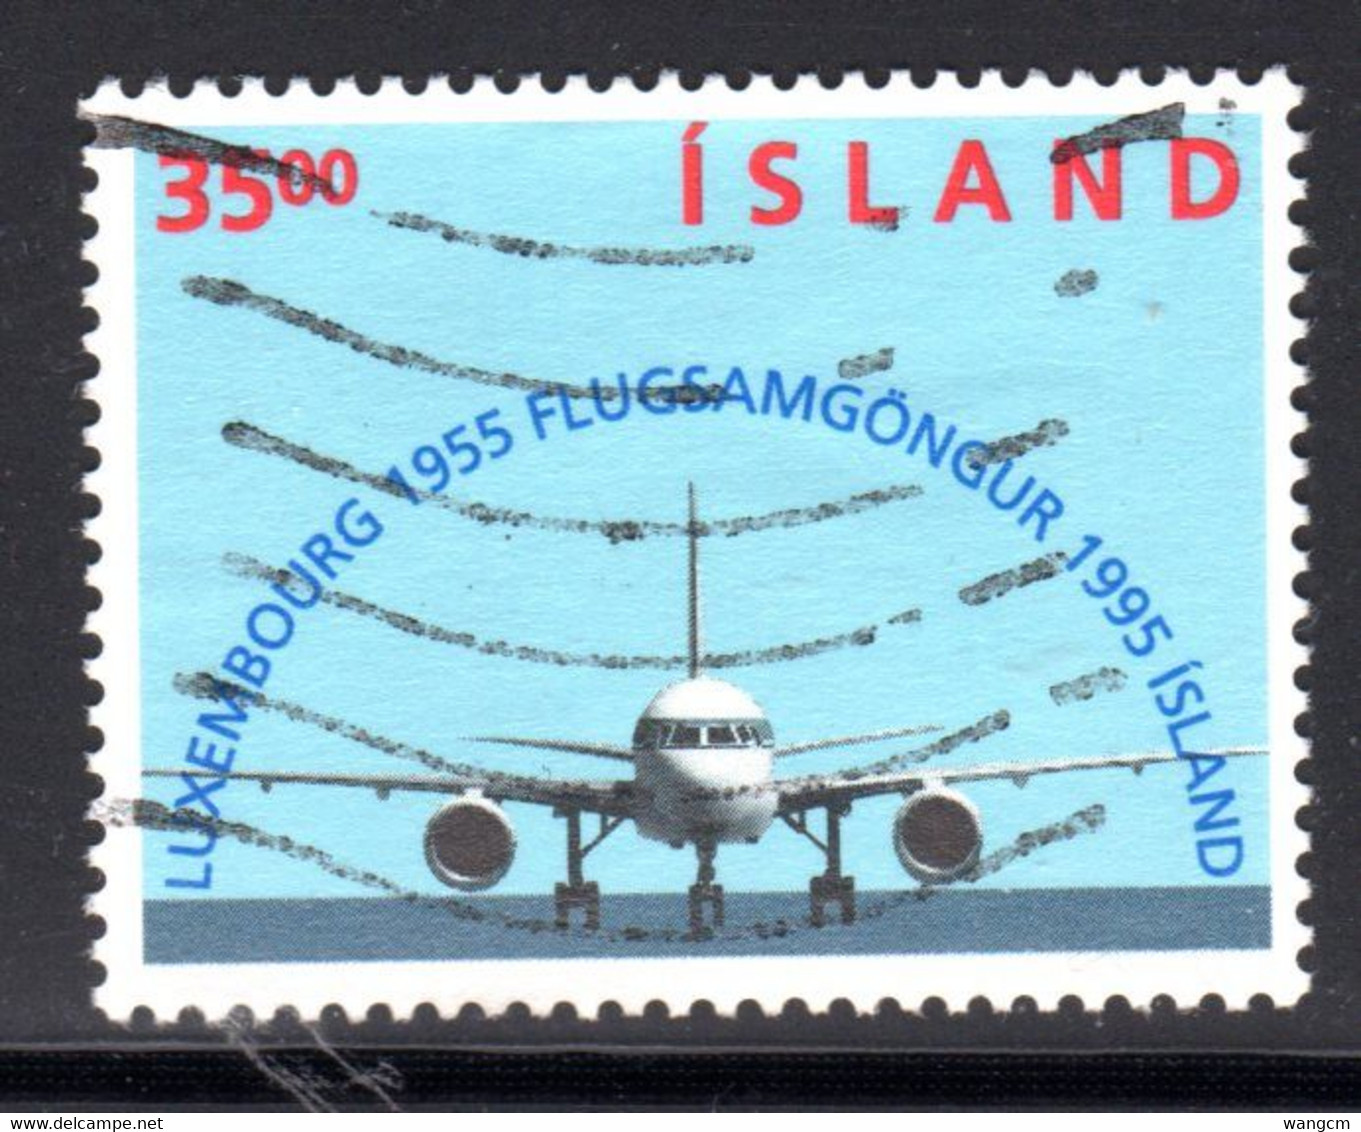 Iceland 1995 35k Iceland - Luxembourg Air Link Fine Used - Used Stamps